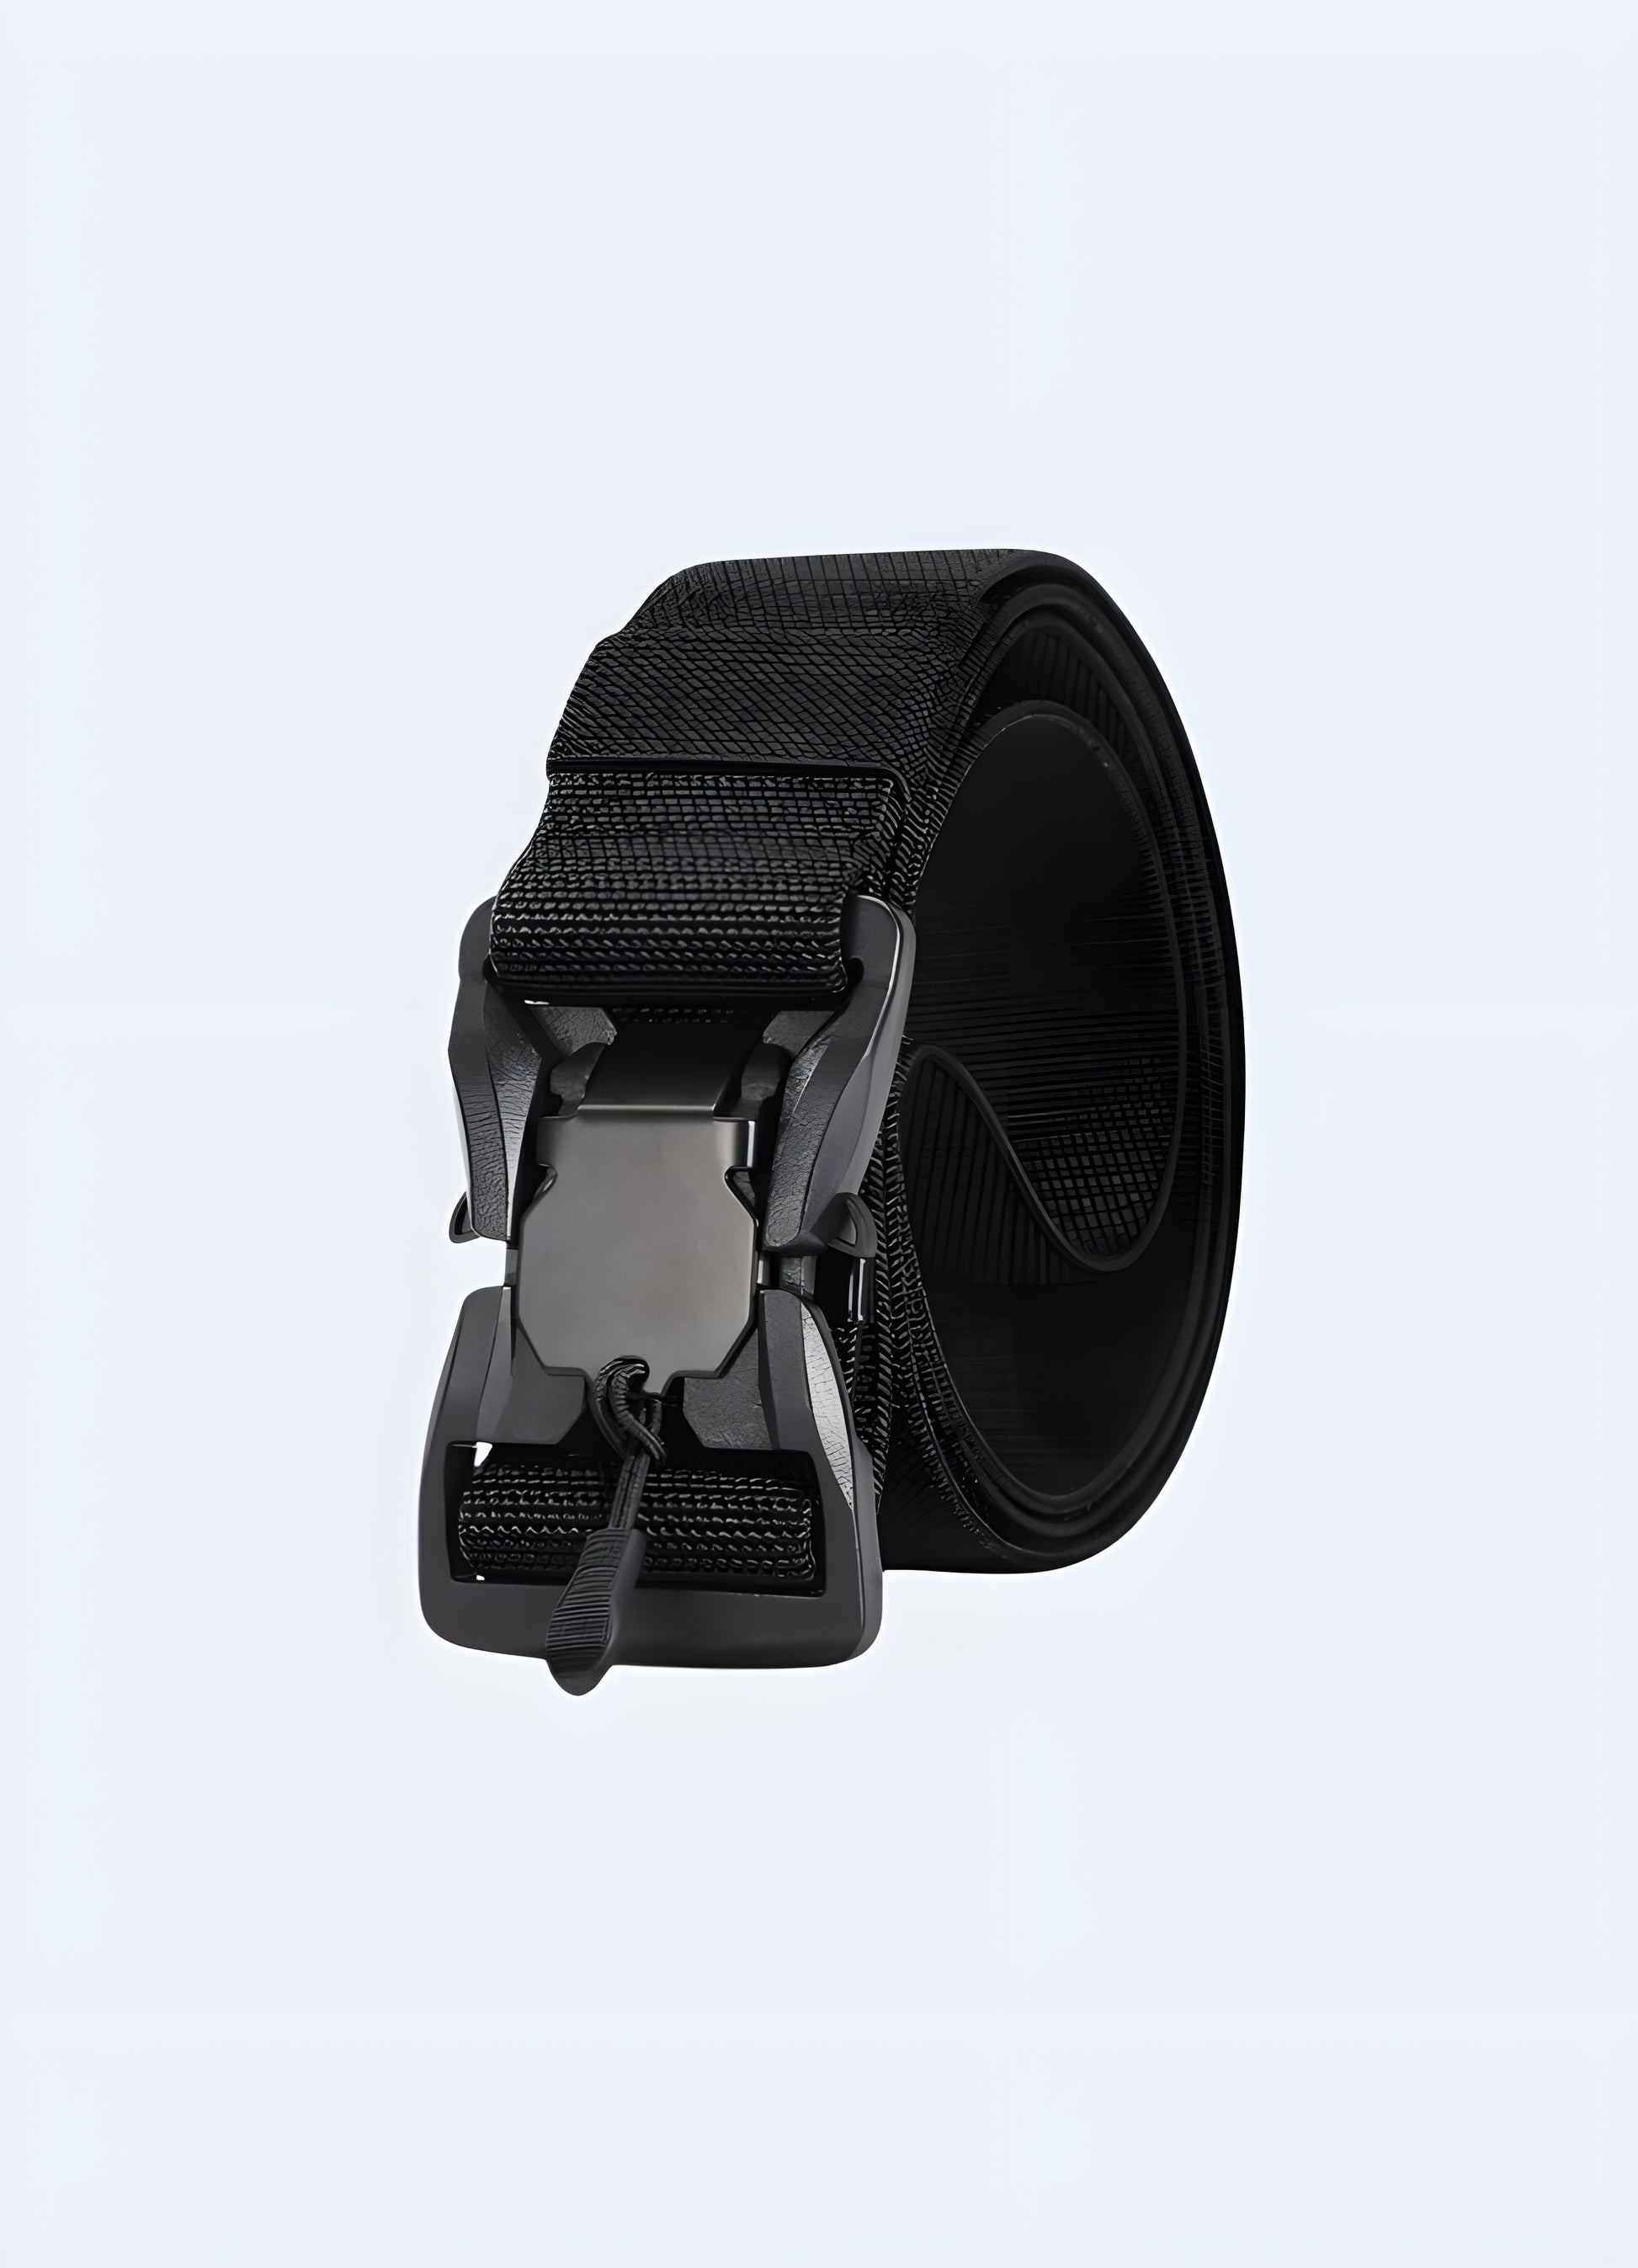 Our Black Utility Belt, a must-have accessory in the techwear universe.